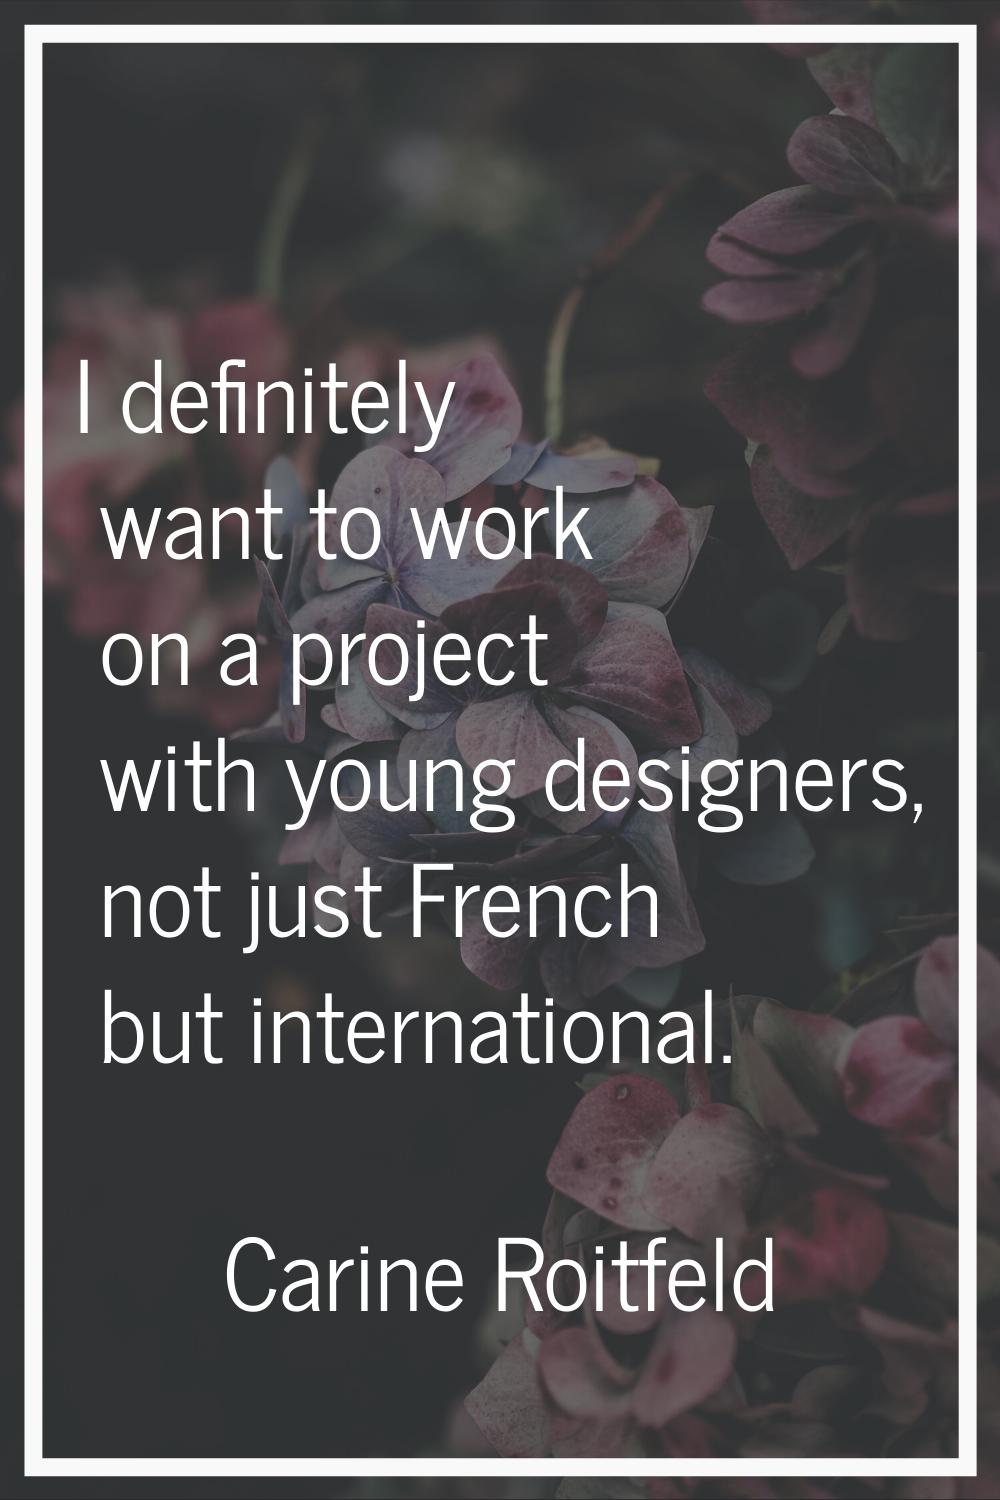 I definitely want to work on a project with young designers, not just French but international.